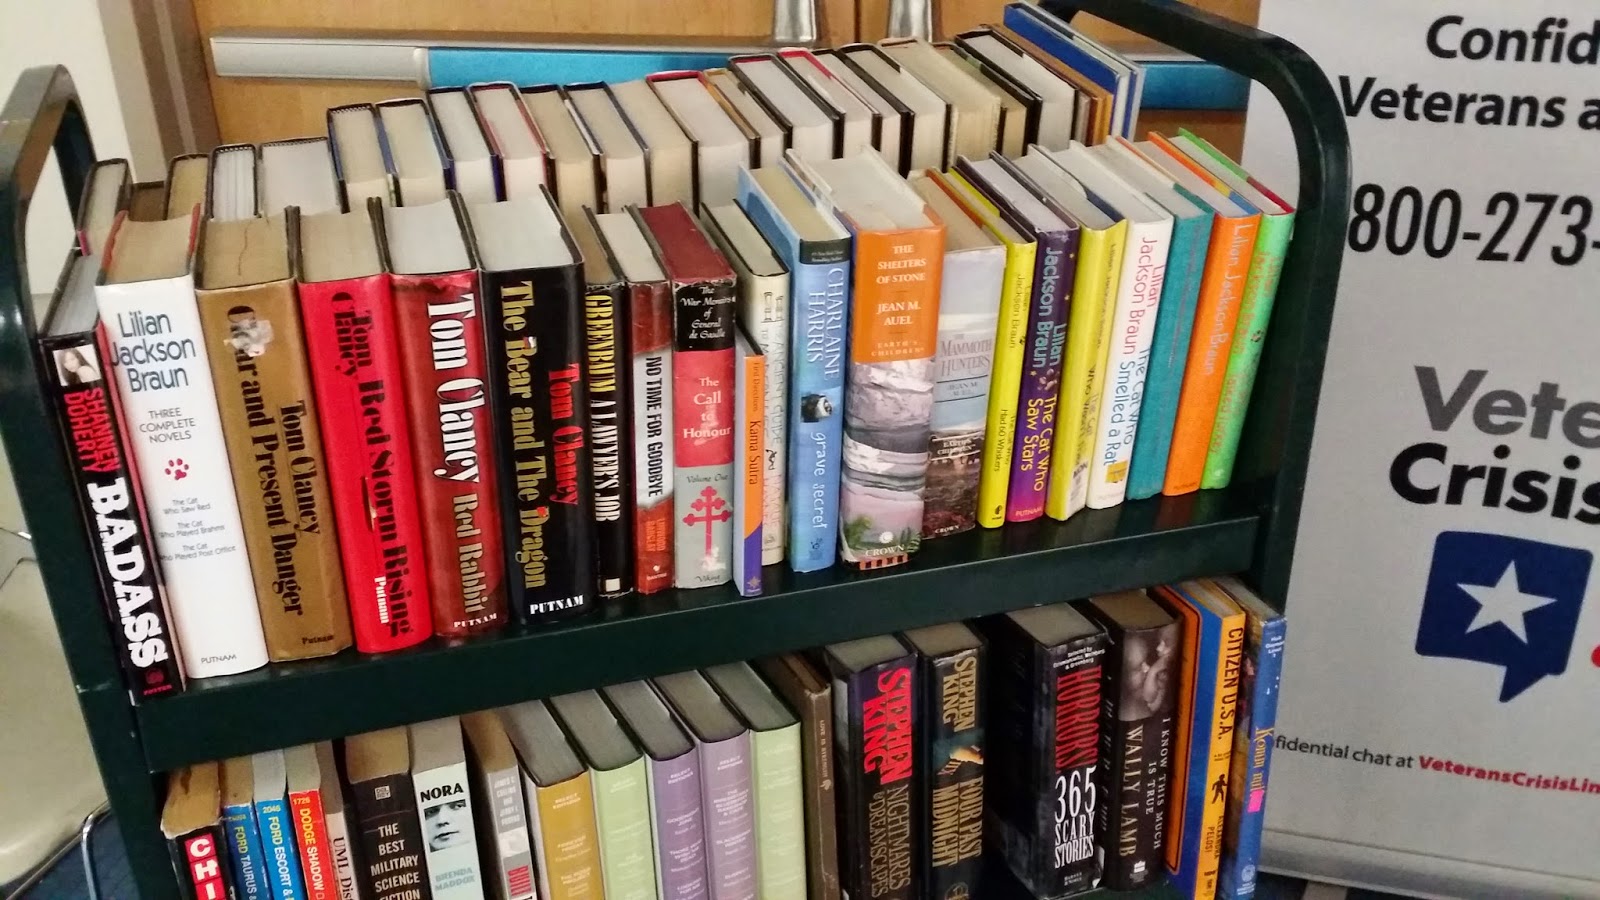 Veterans And Friends of Puget Sound Half Price Books' Book Donation to